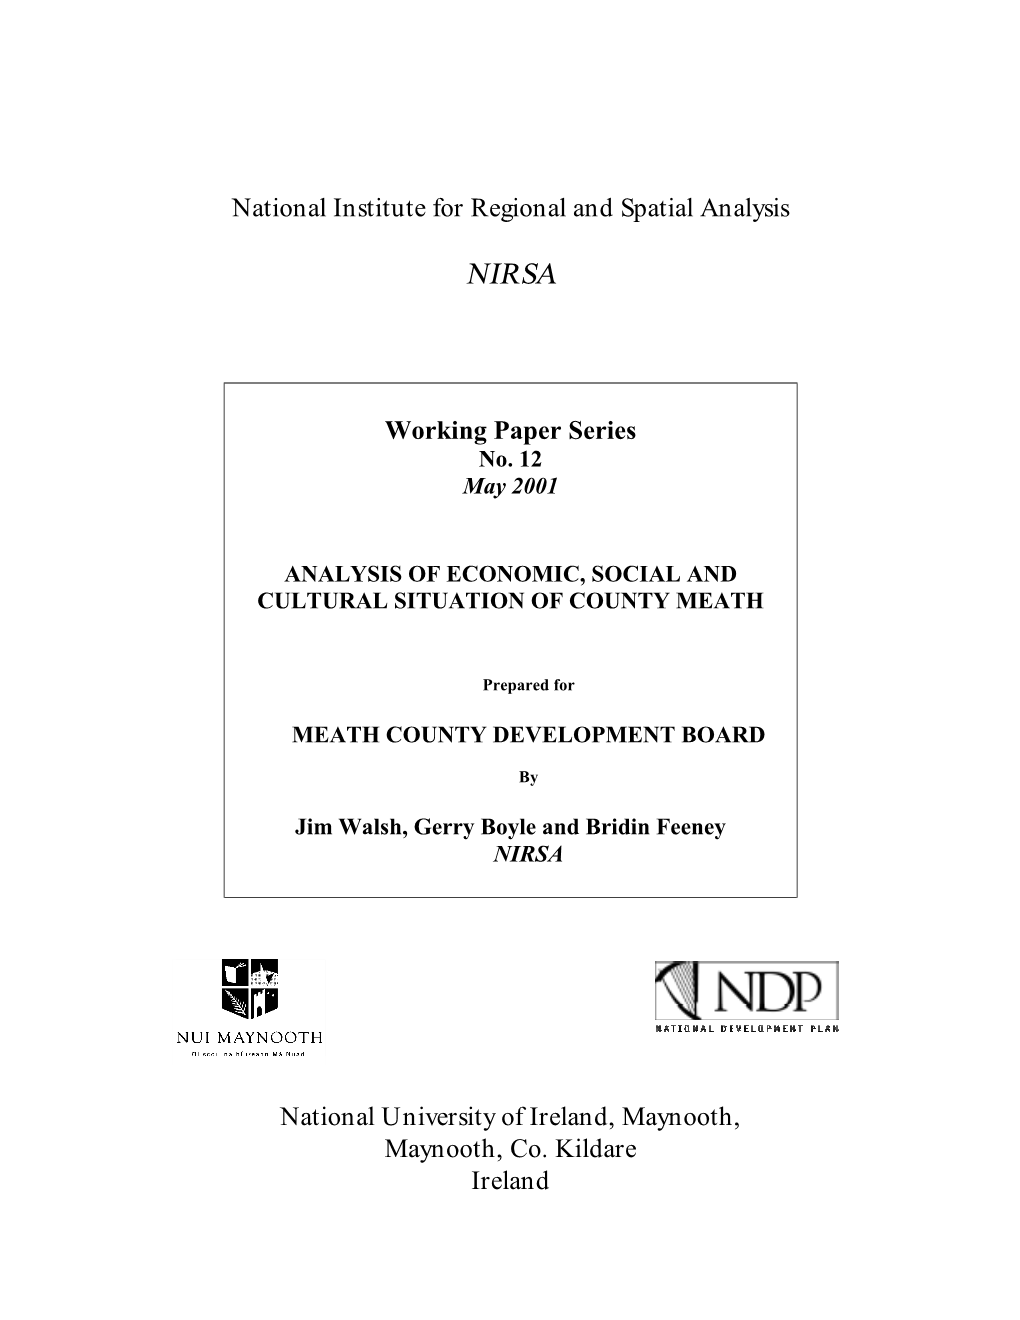 National Institute for Regional and Spatial Analysis Working Paper